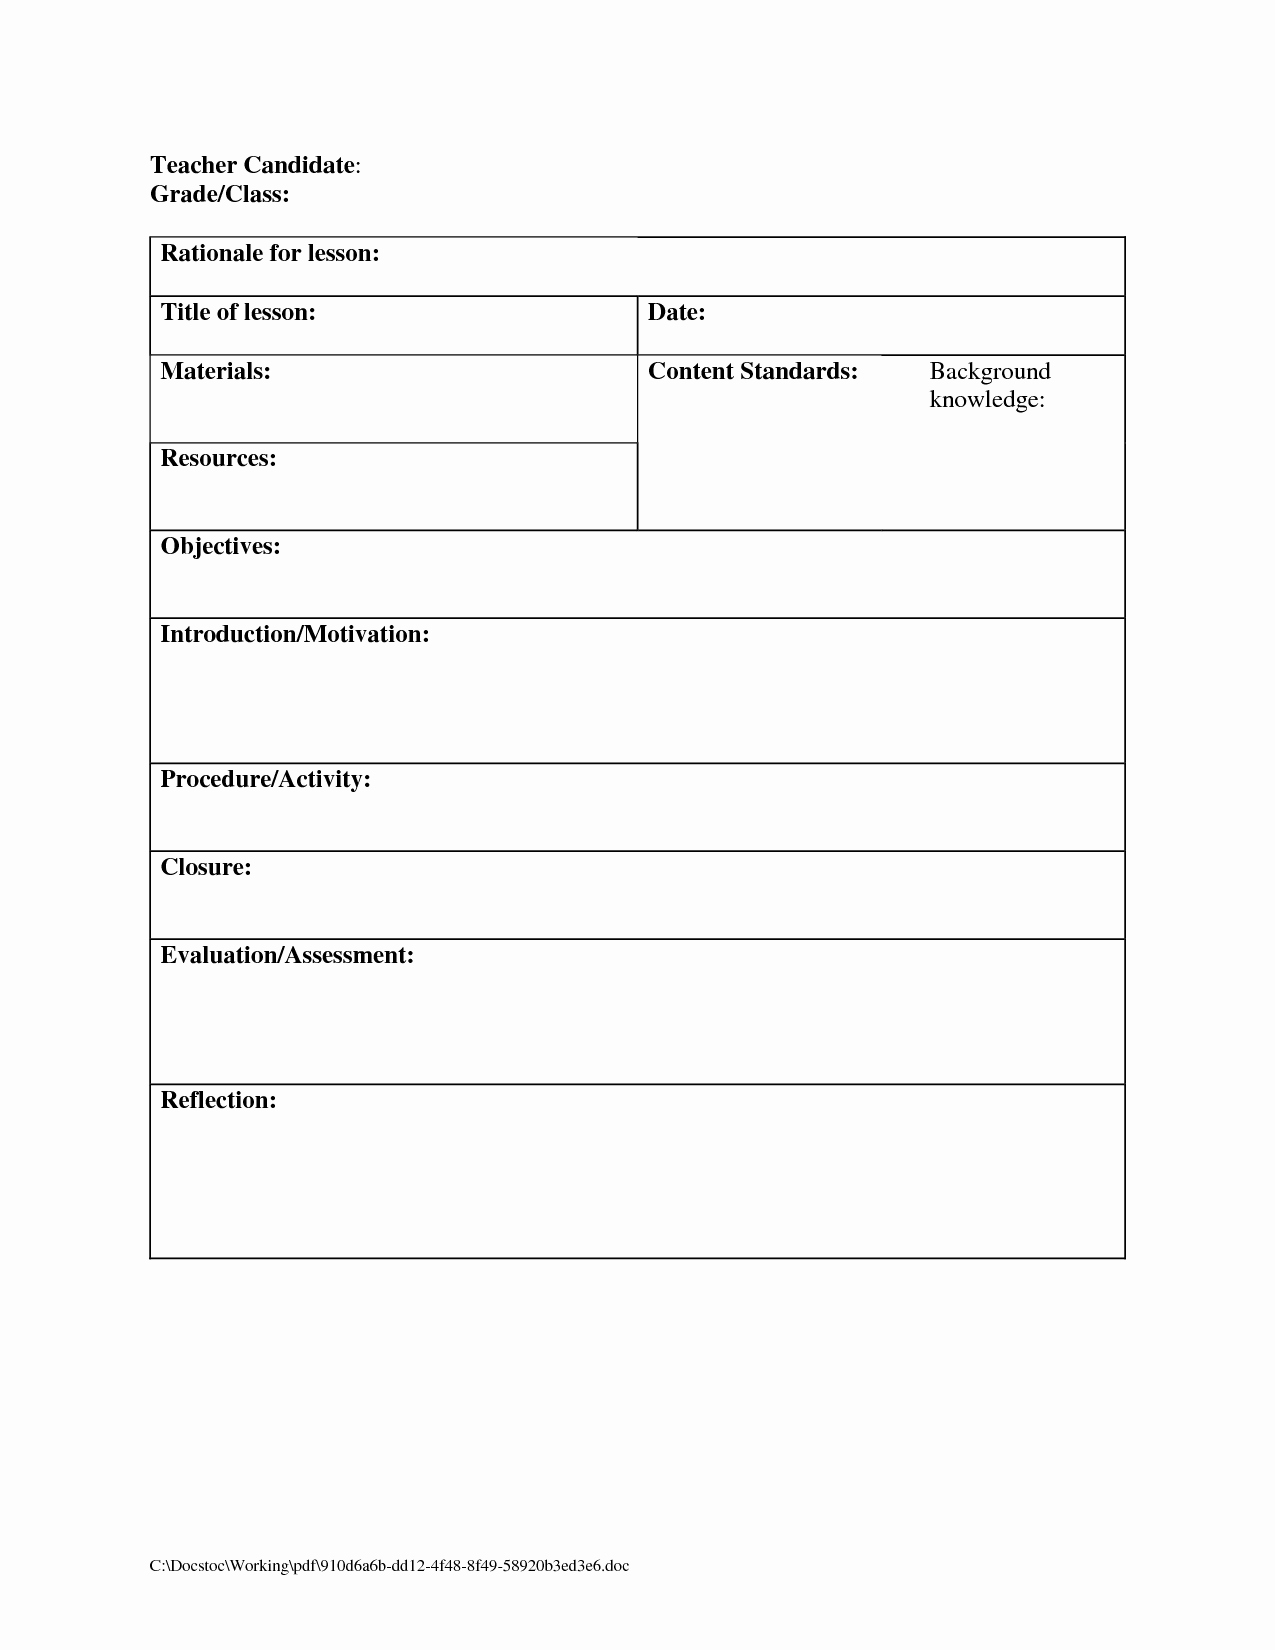 Elementary School Lesson Plan Template Elegant Printable Blank Lesson Plans form for Counselors